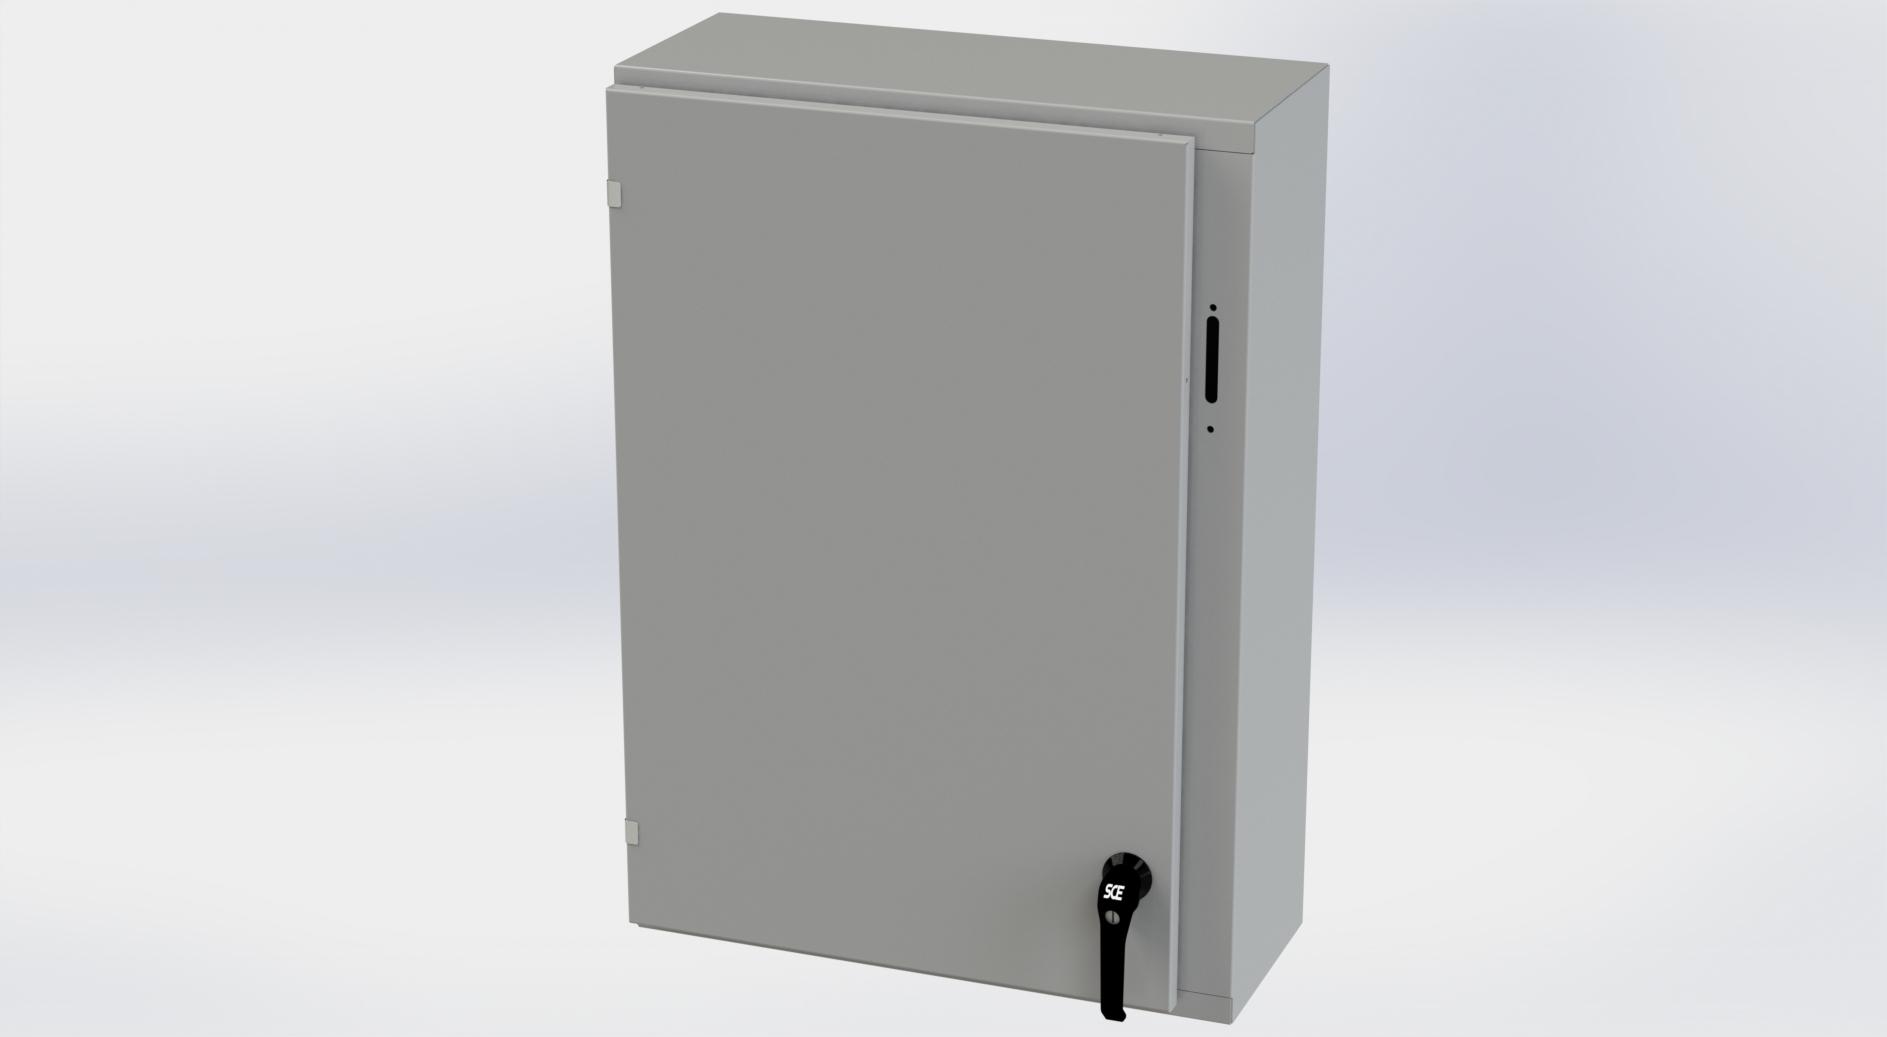 Saginaw Control SCE-36XEL2510LP XEL LP Enclosure, Height:36.00", Width:25.38", Depth:10.00", ANSI-61 gray powder coating inside and out. Optional sub-panels are powder coated white.